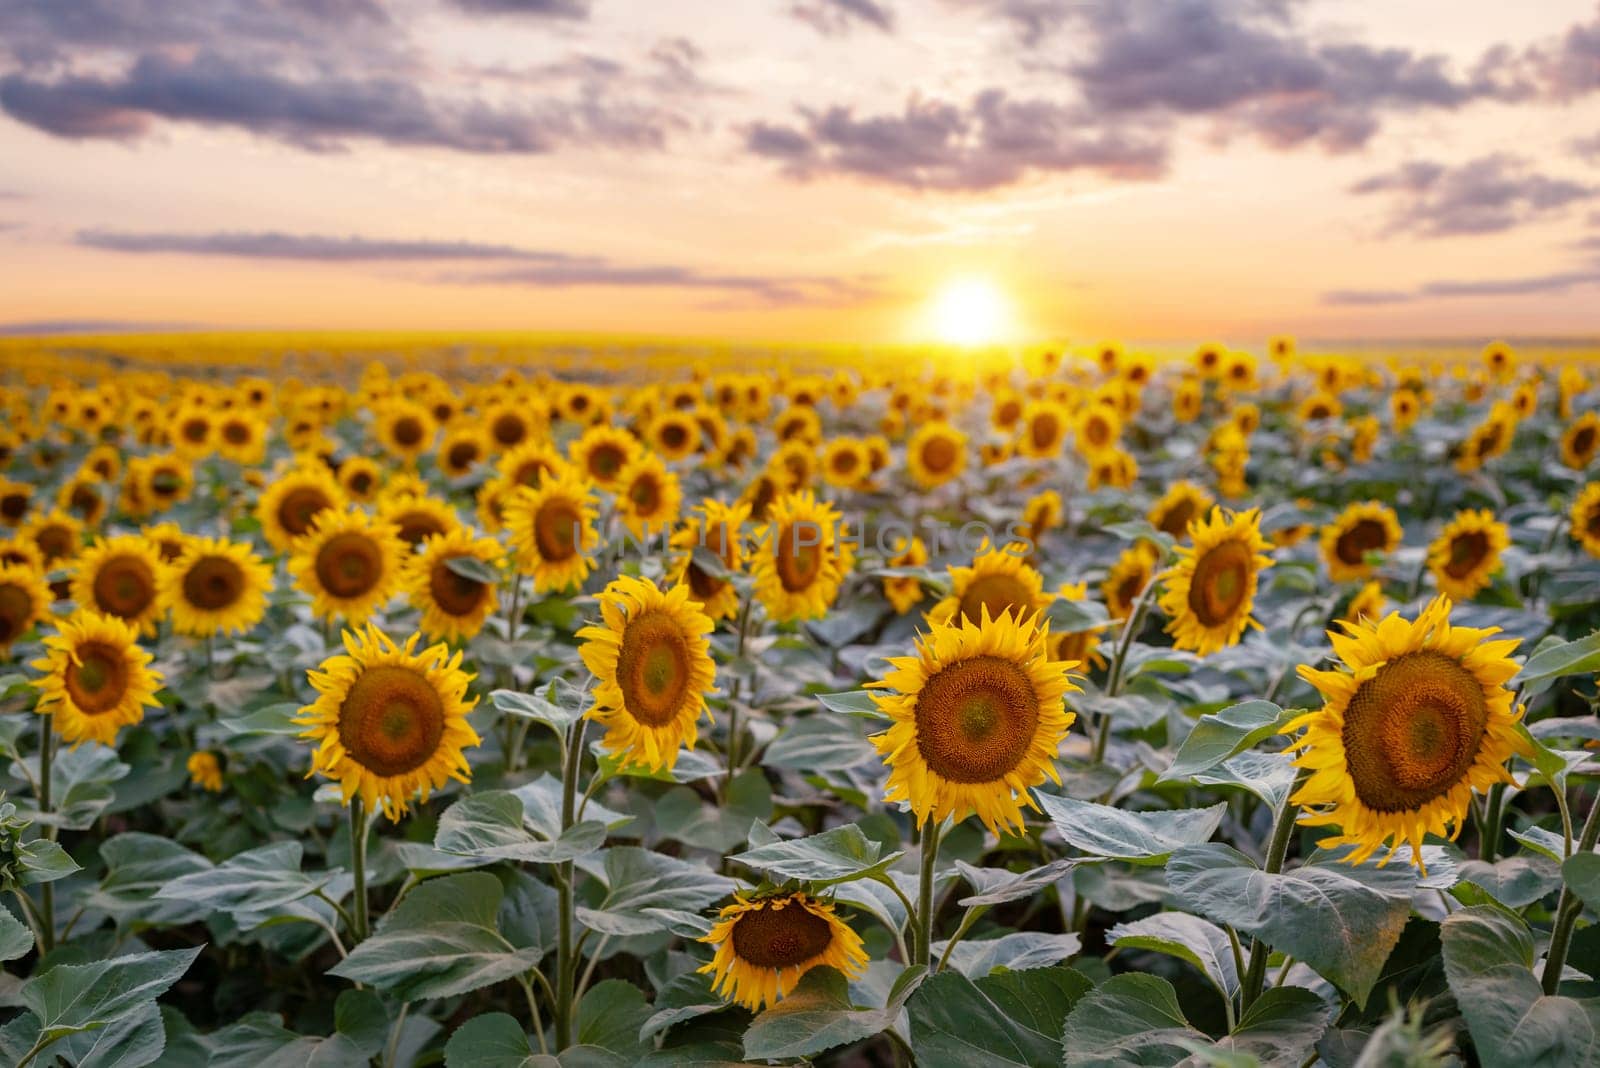 Endless agricultural field of bright blooming sunflowers with last rays of setting sun on the background